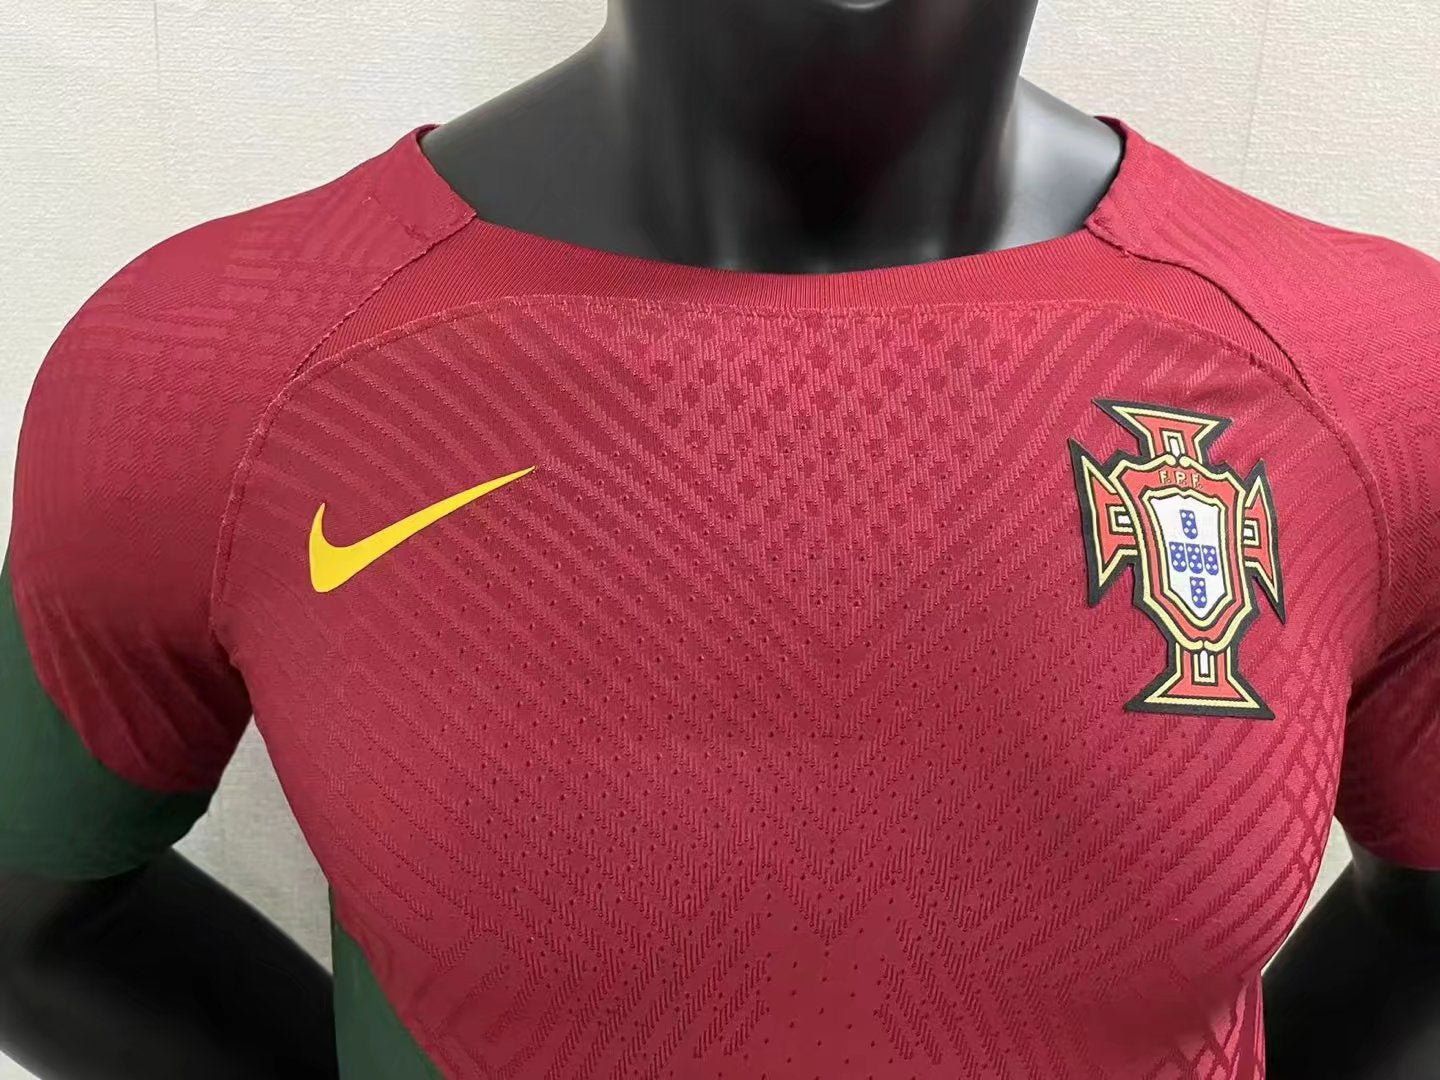 João Félix Ronaldo Portugal National Team 2022 Authentic Nike On-Field Player Version Home Jersey - Red